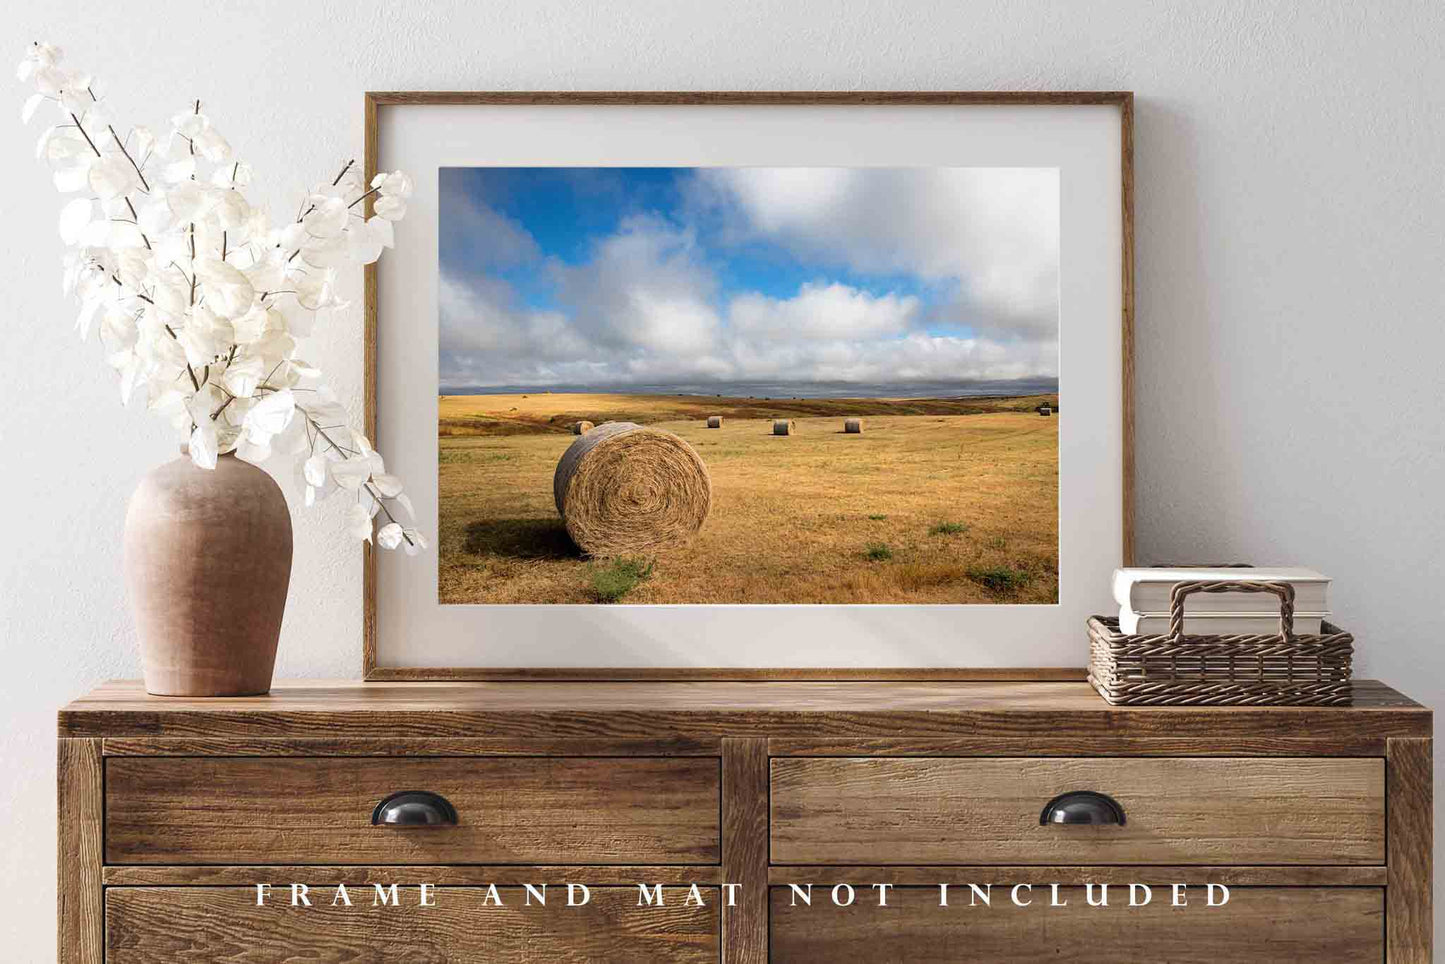 Farm Photography Wall Art Print - Picture of Hay Bales on Prairie Landscape Under Clearing Skies in Western South Dakota Plains Decor